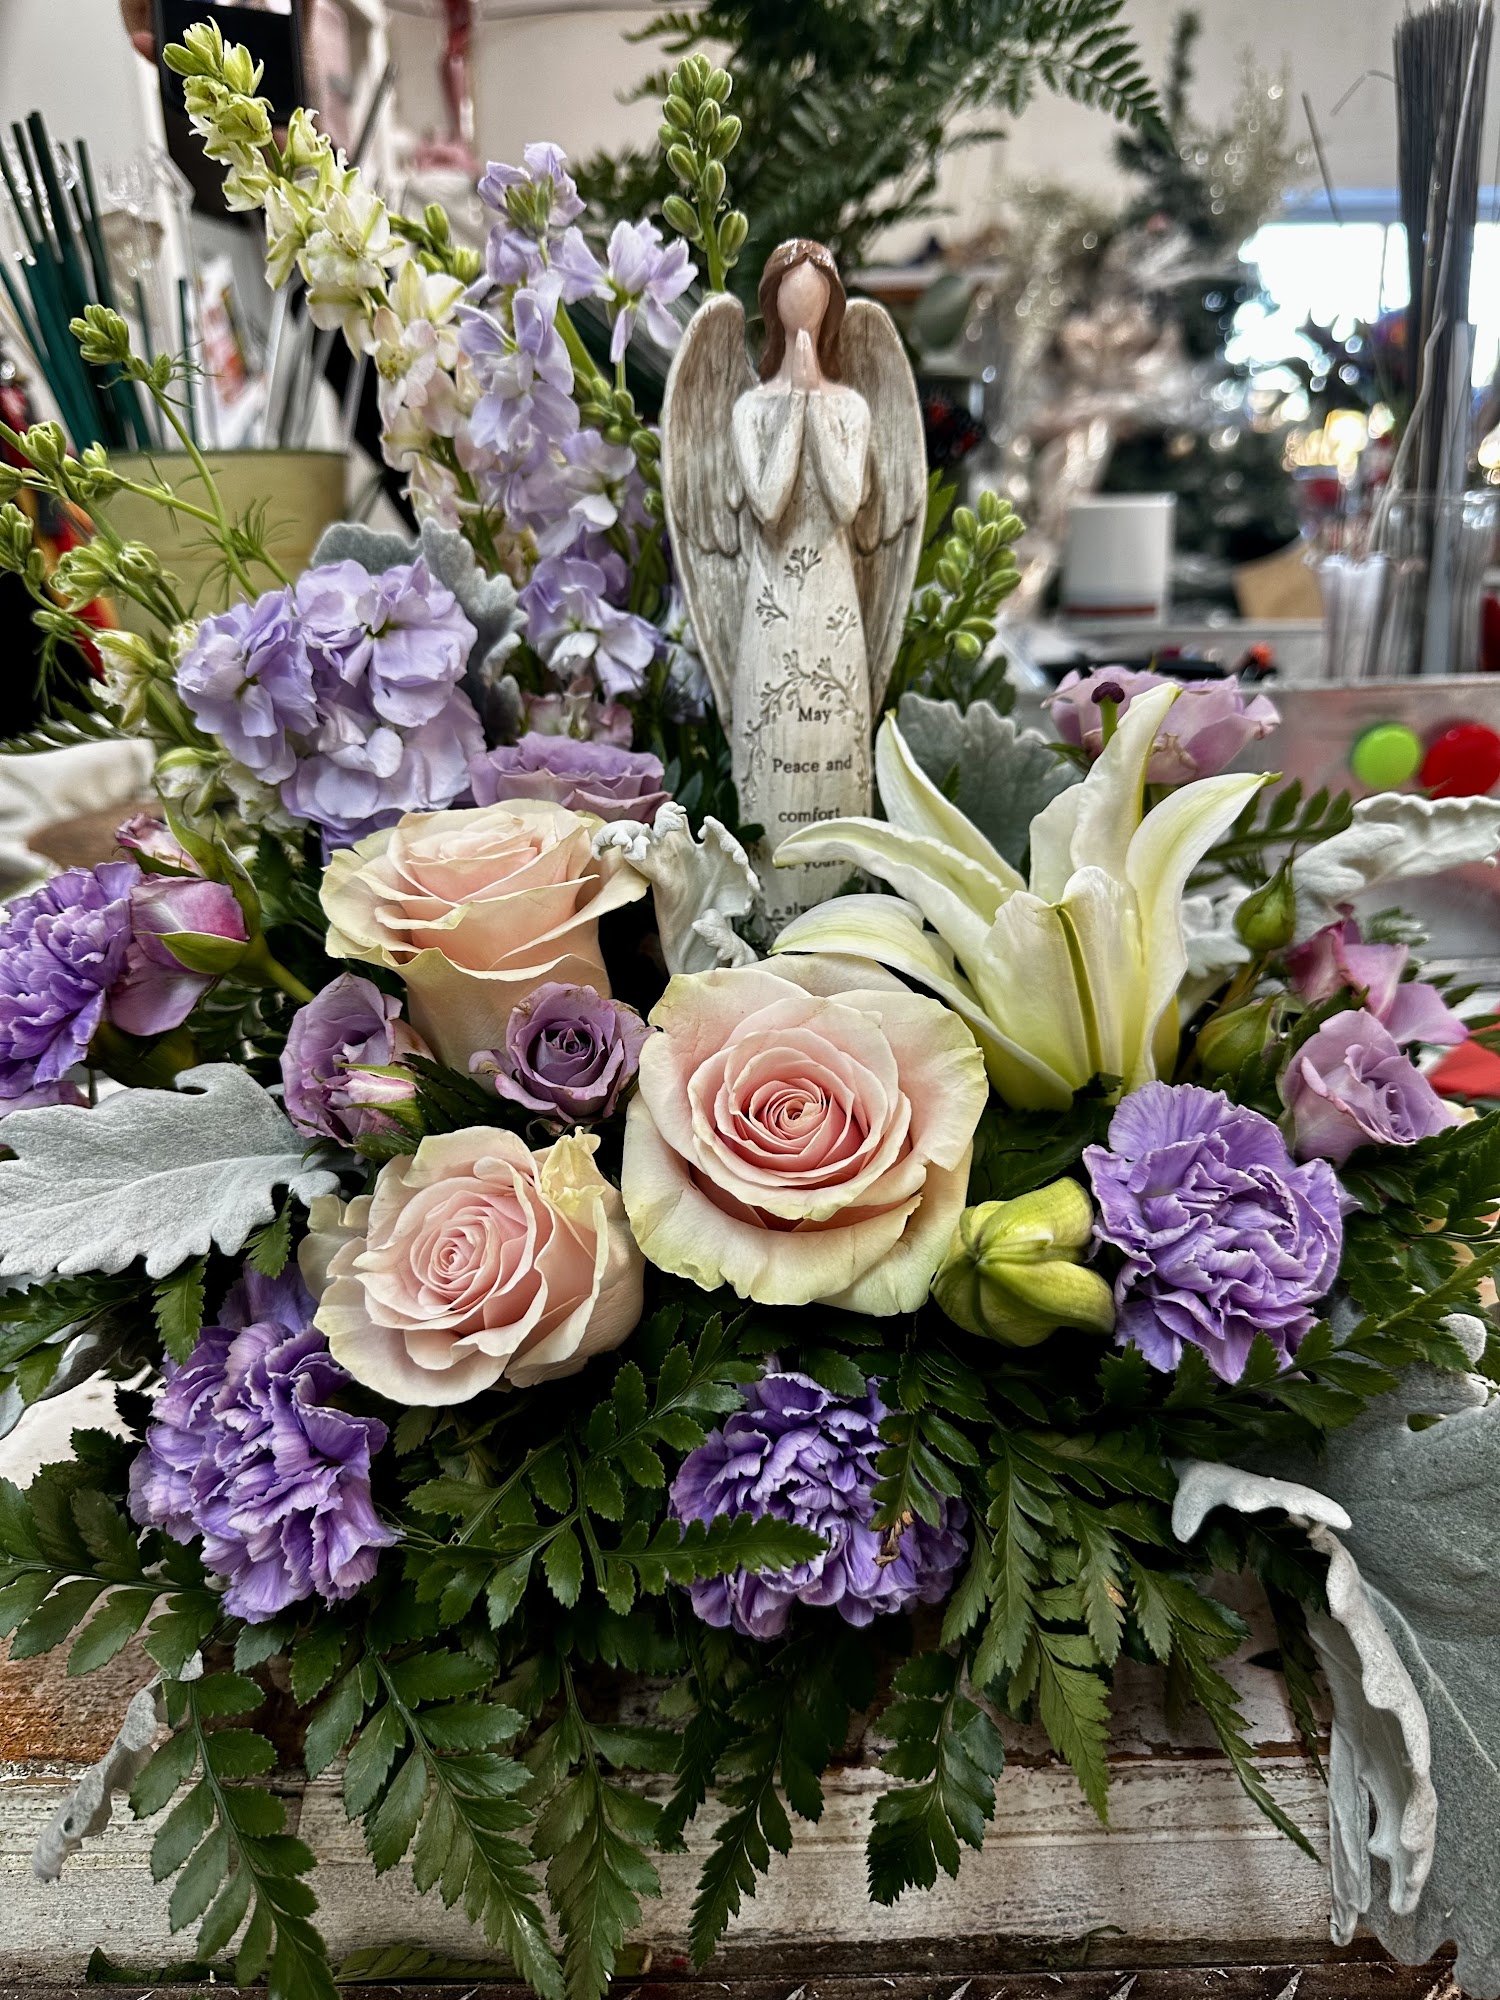 A Family Flower Shop and Keepsakes